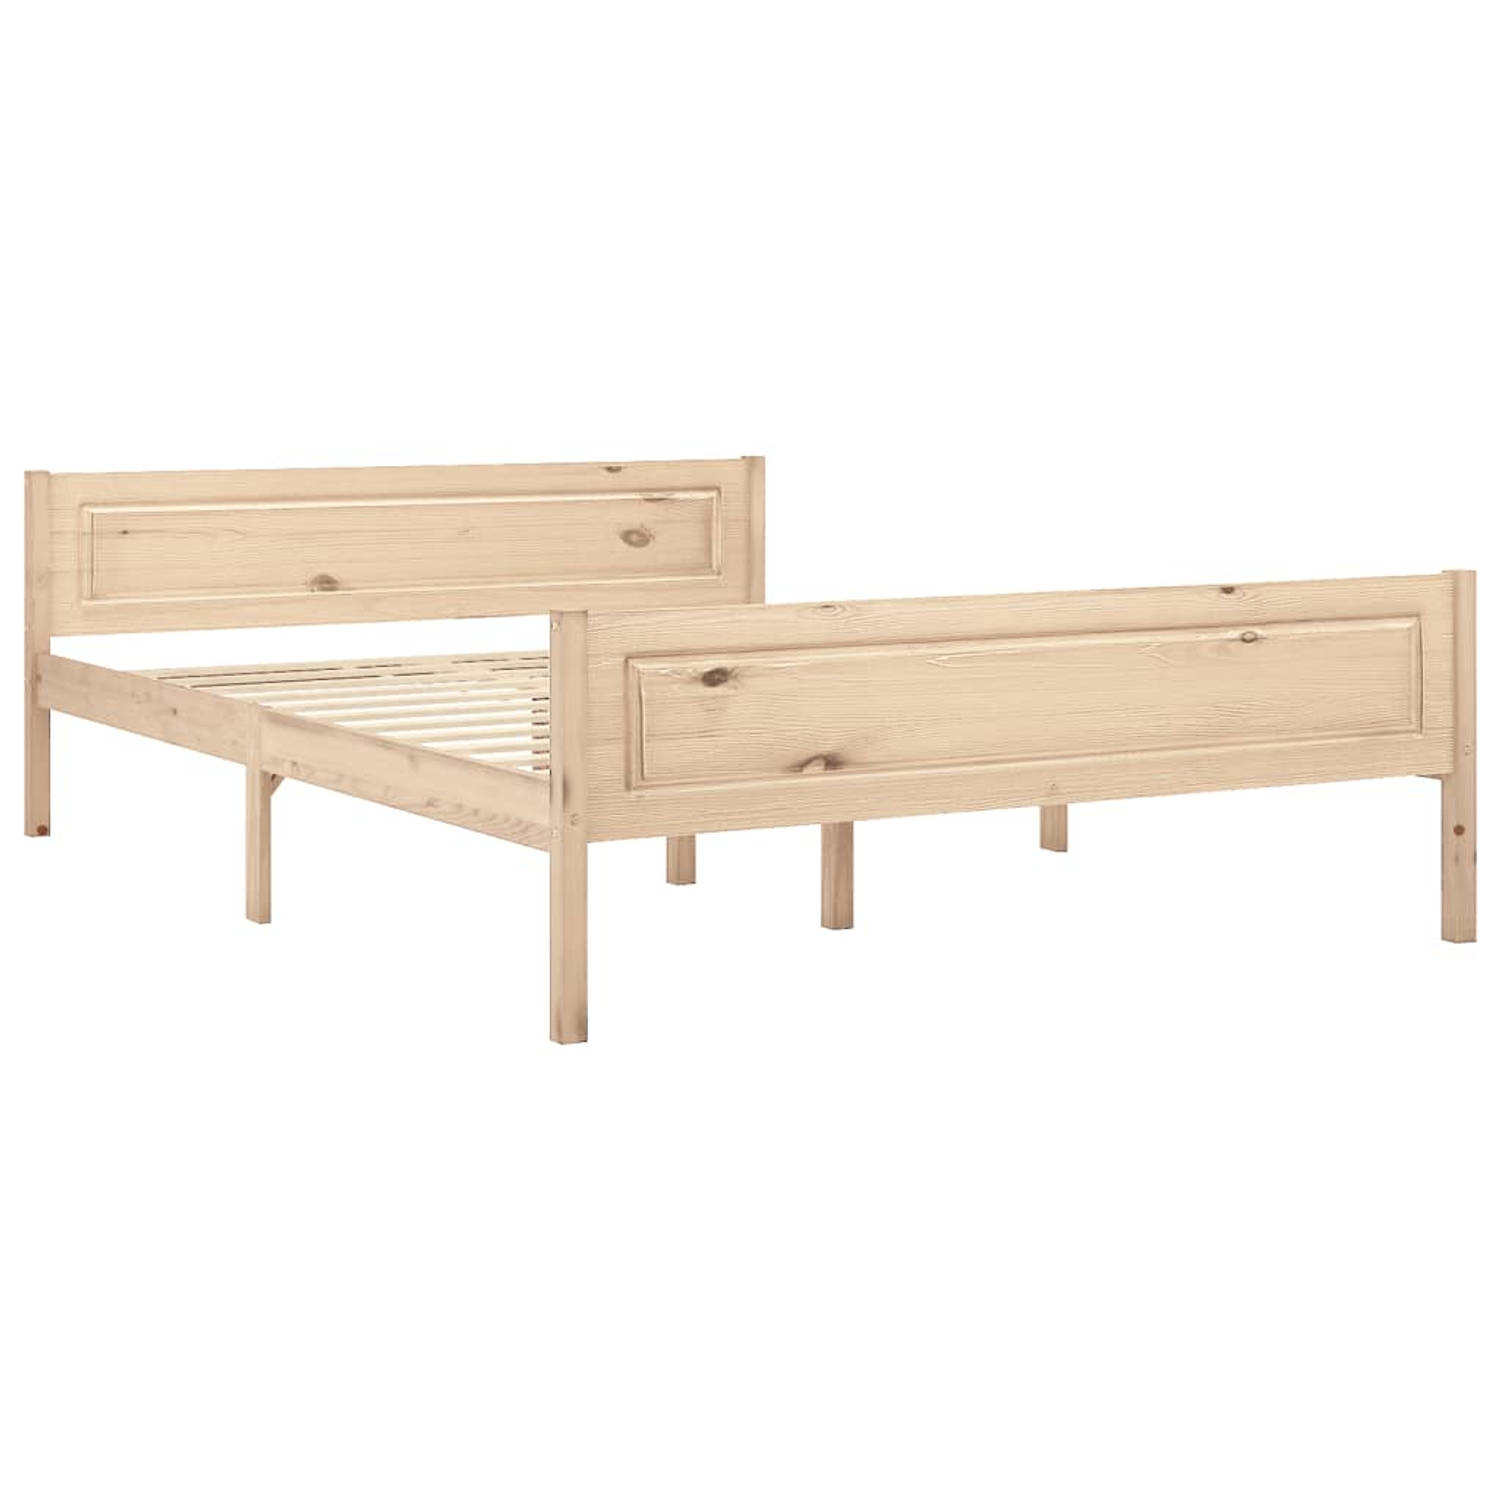 The Living Store Bedframe massief grenenhout 160x200 cm - Bedframe - Bedframe - Bed Frame - Bed Frames - Bed - Bedden - 2-persoonsbed - 2-persoonsbedden - Tweepersoons Bed